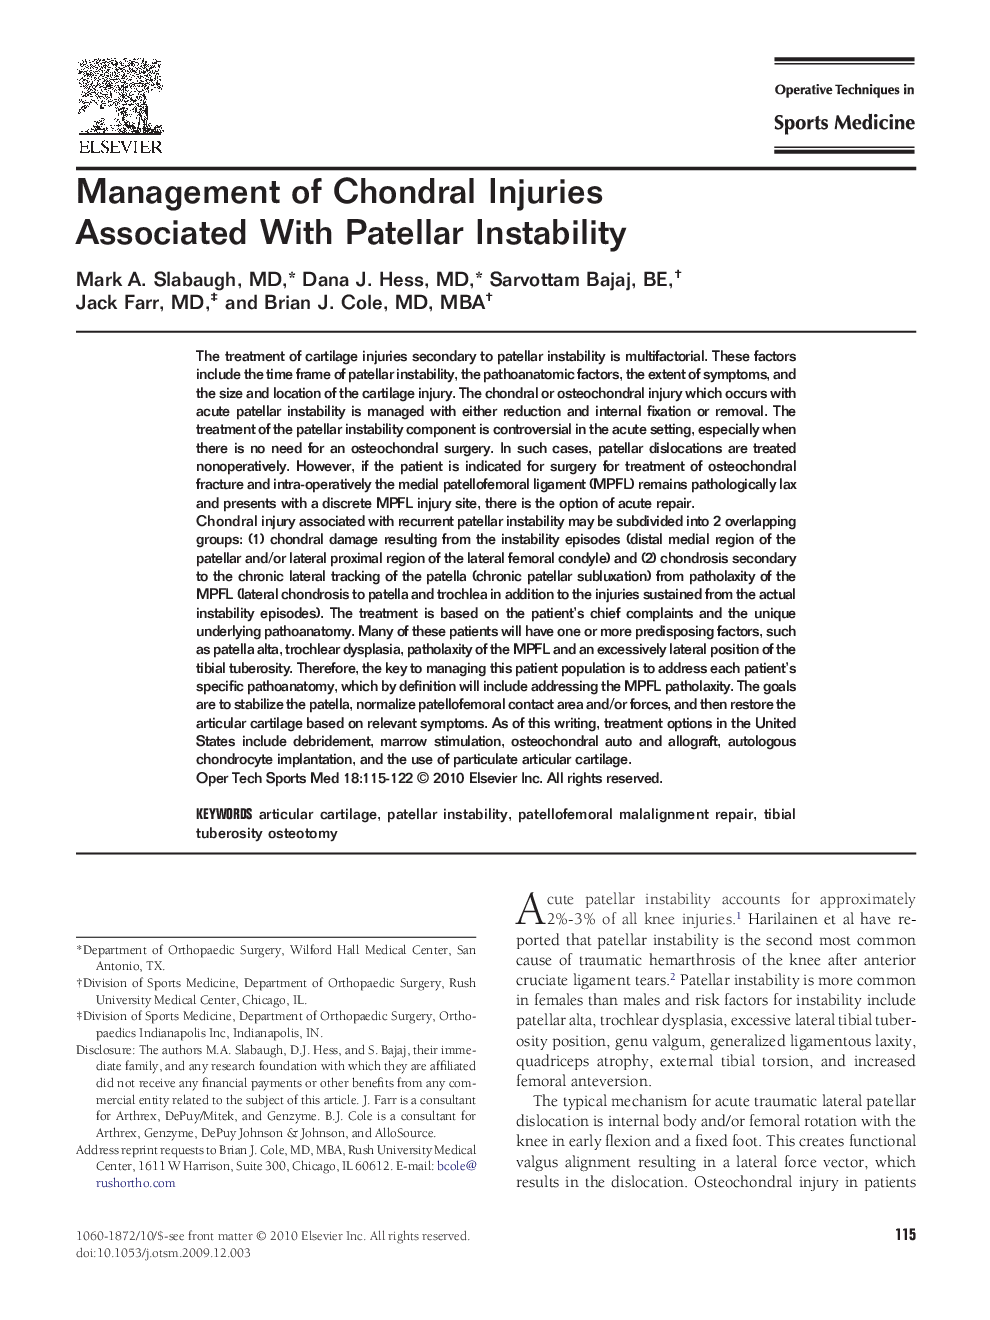 Management of Chondral Injuries Associated With Patellar Instability 